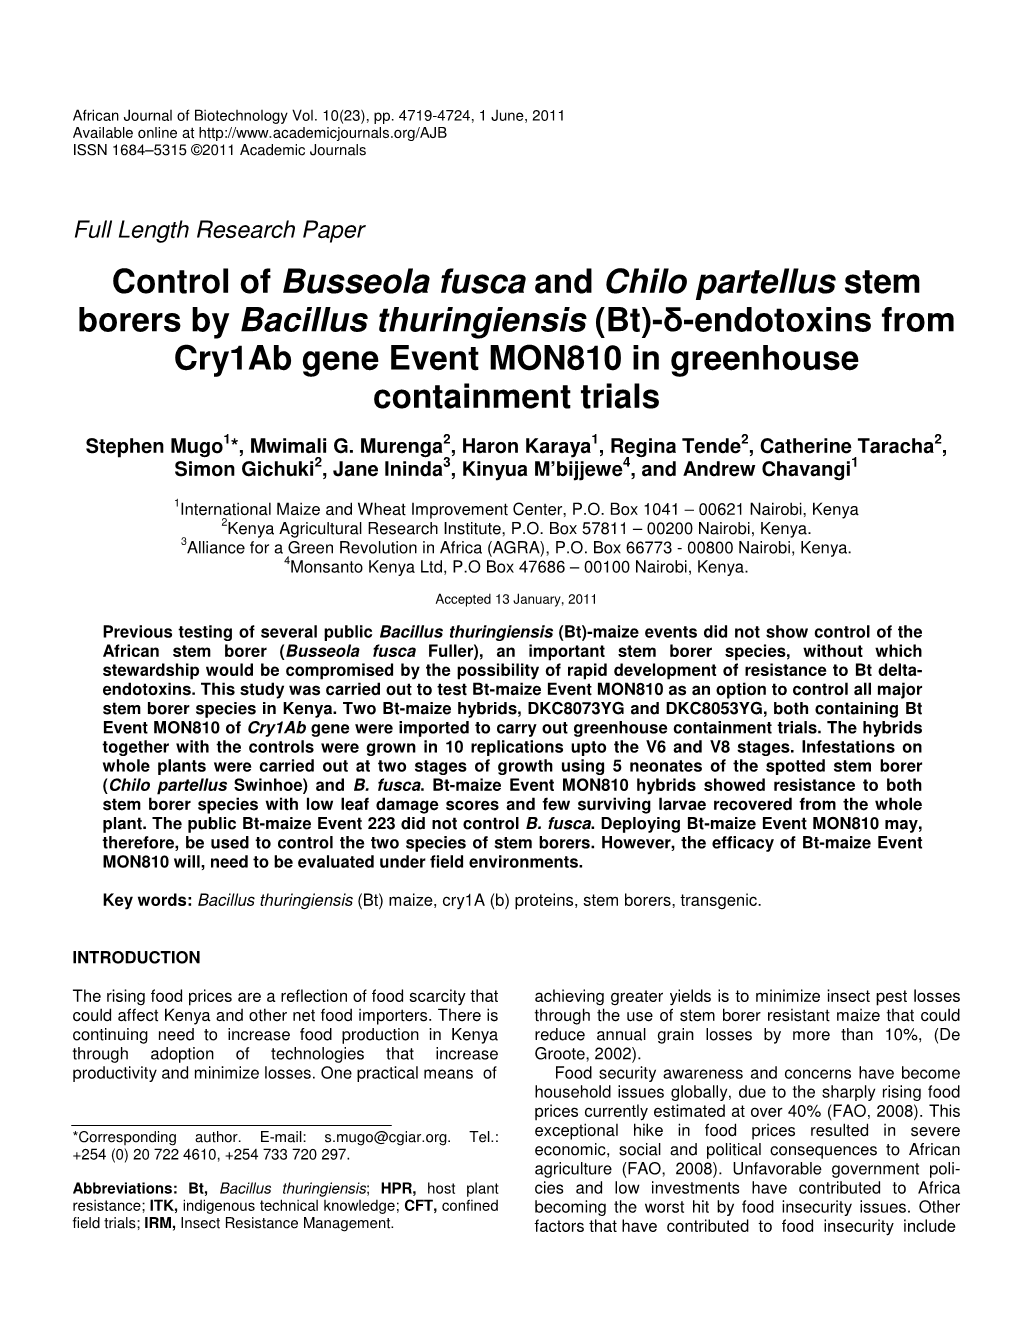 Control of Busseola Fusca and Chilo Partellus Stem Borers by Bacillus Thuringiensis (Bt)--Endotoxins from Cry1ab Gene Event MON810 in Greenhouse Containment Trials